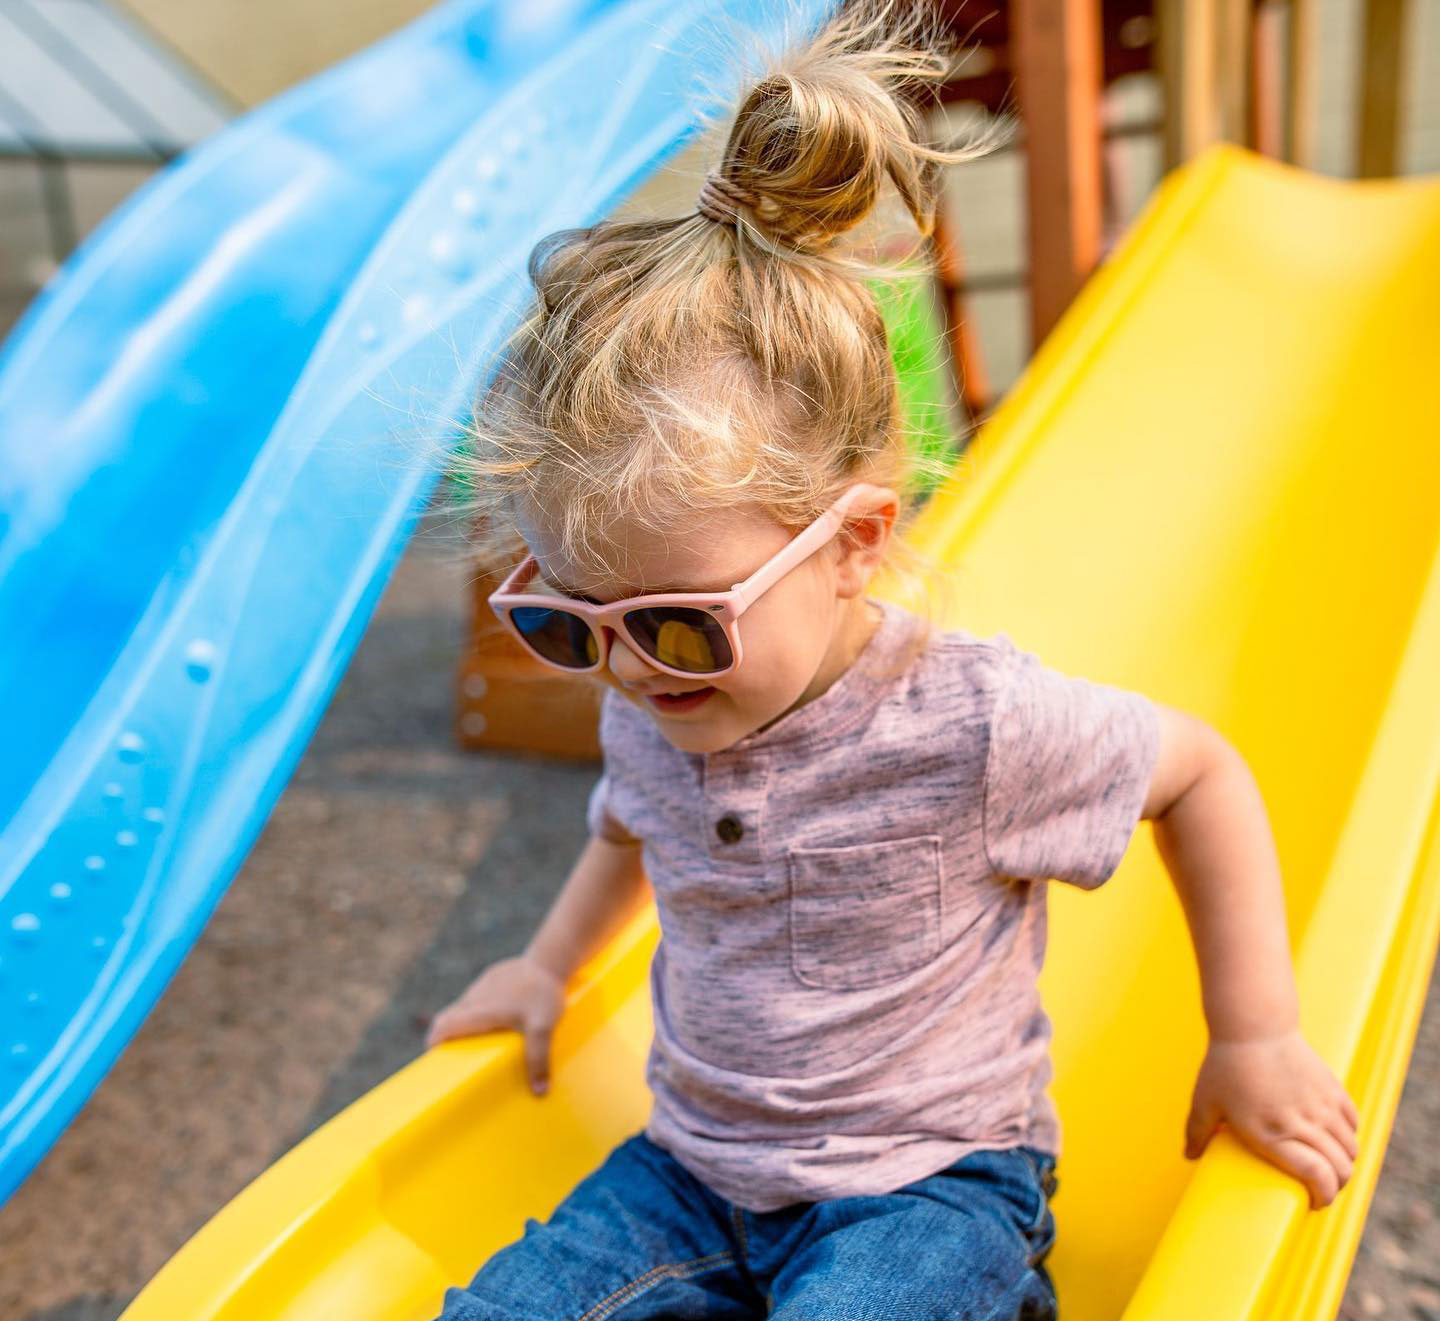 Child going down a yellow slide wearing sunglasses.